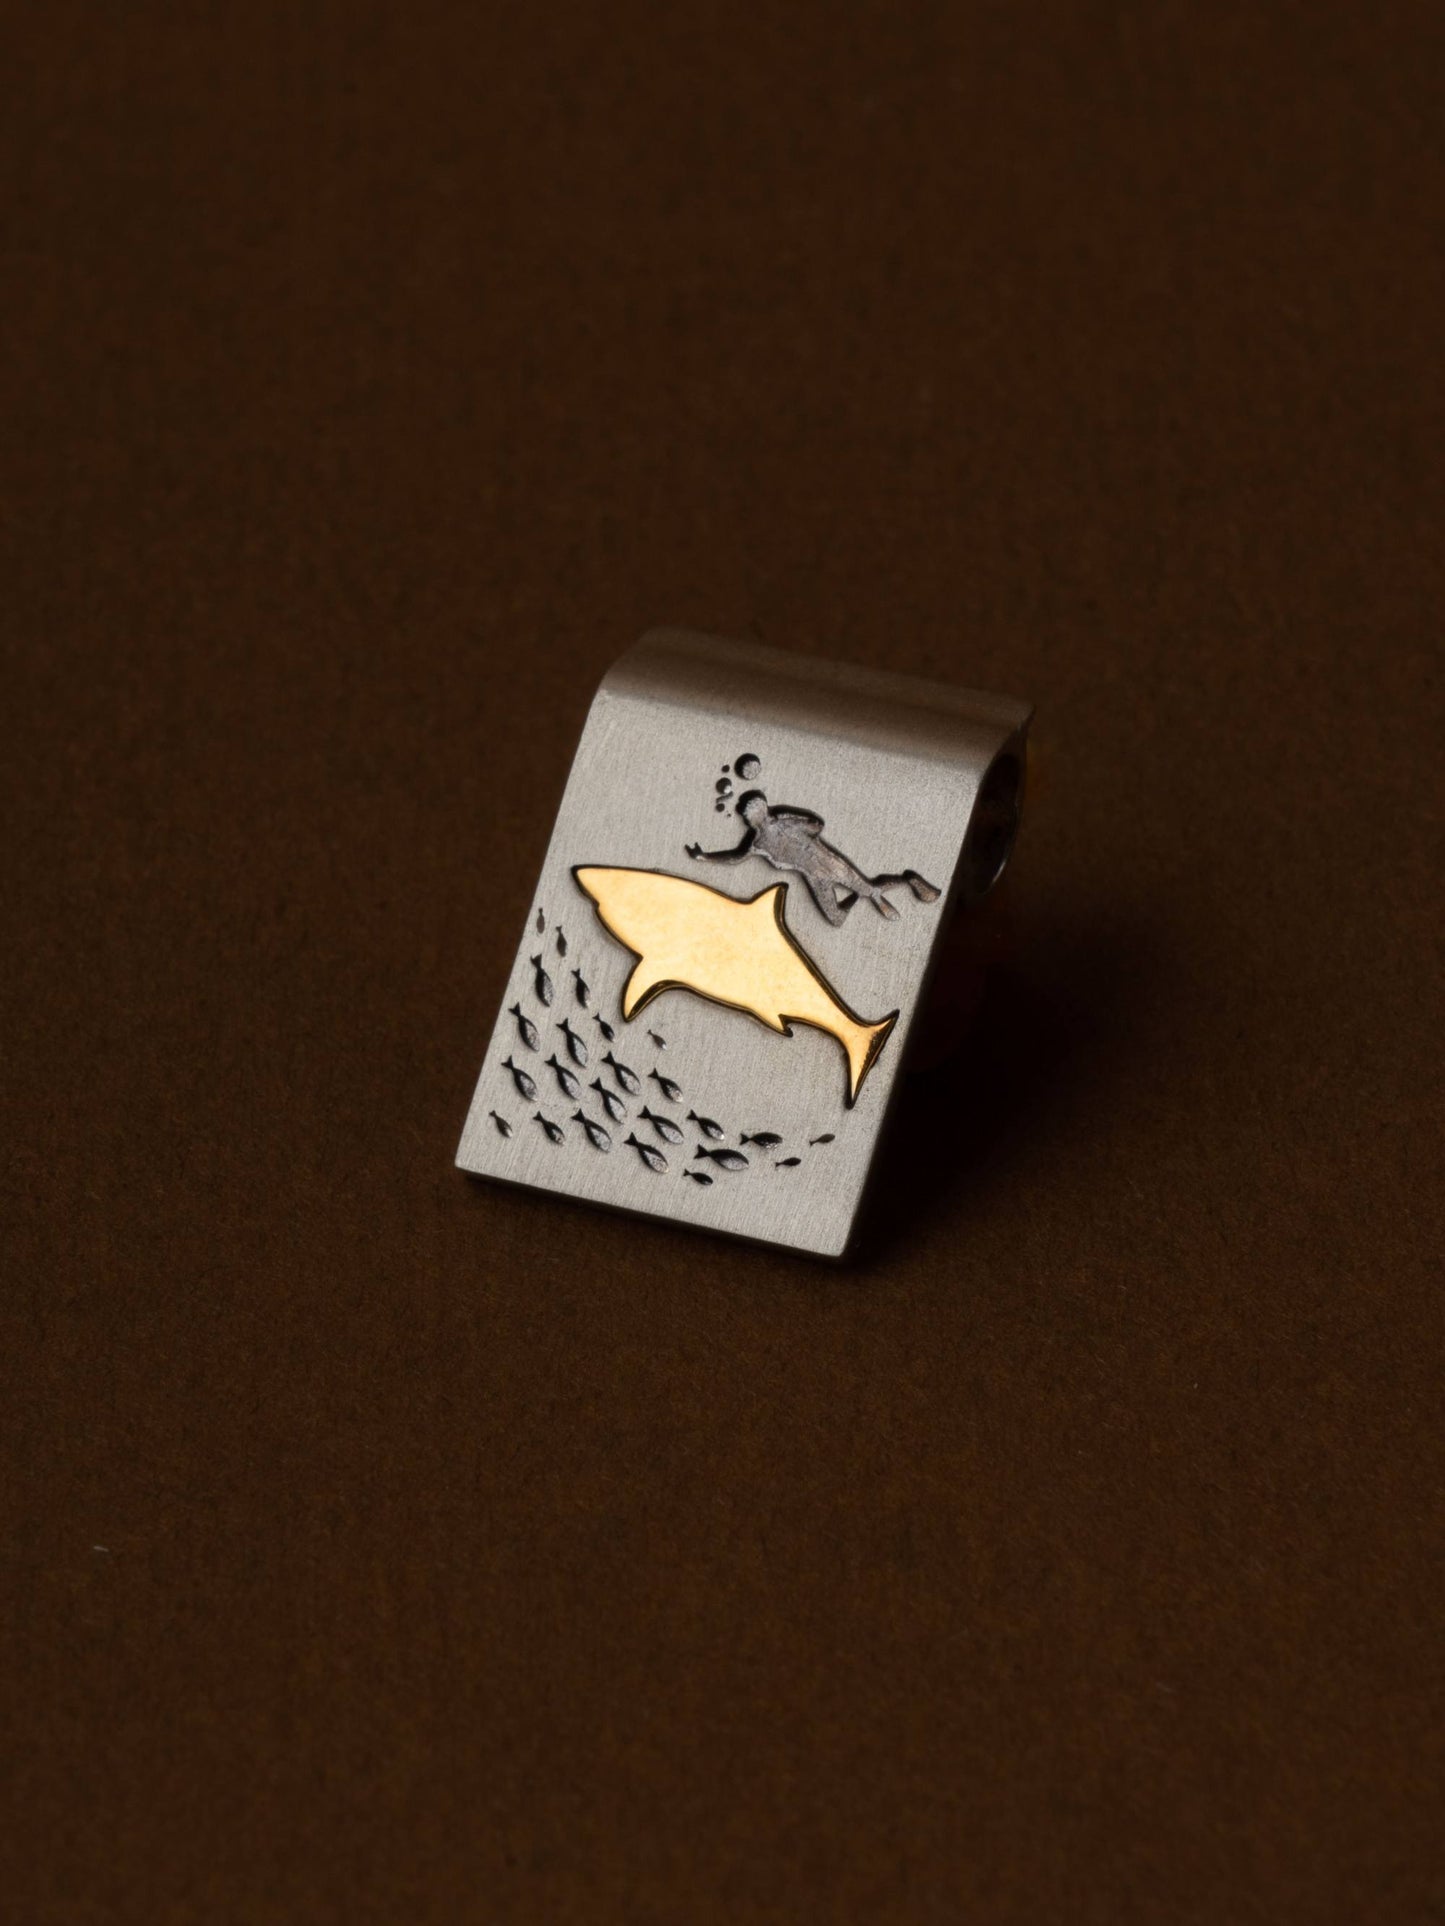 Diving with Sharks gold pin